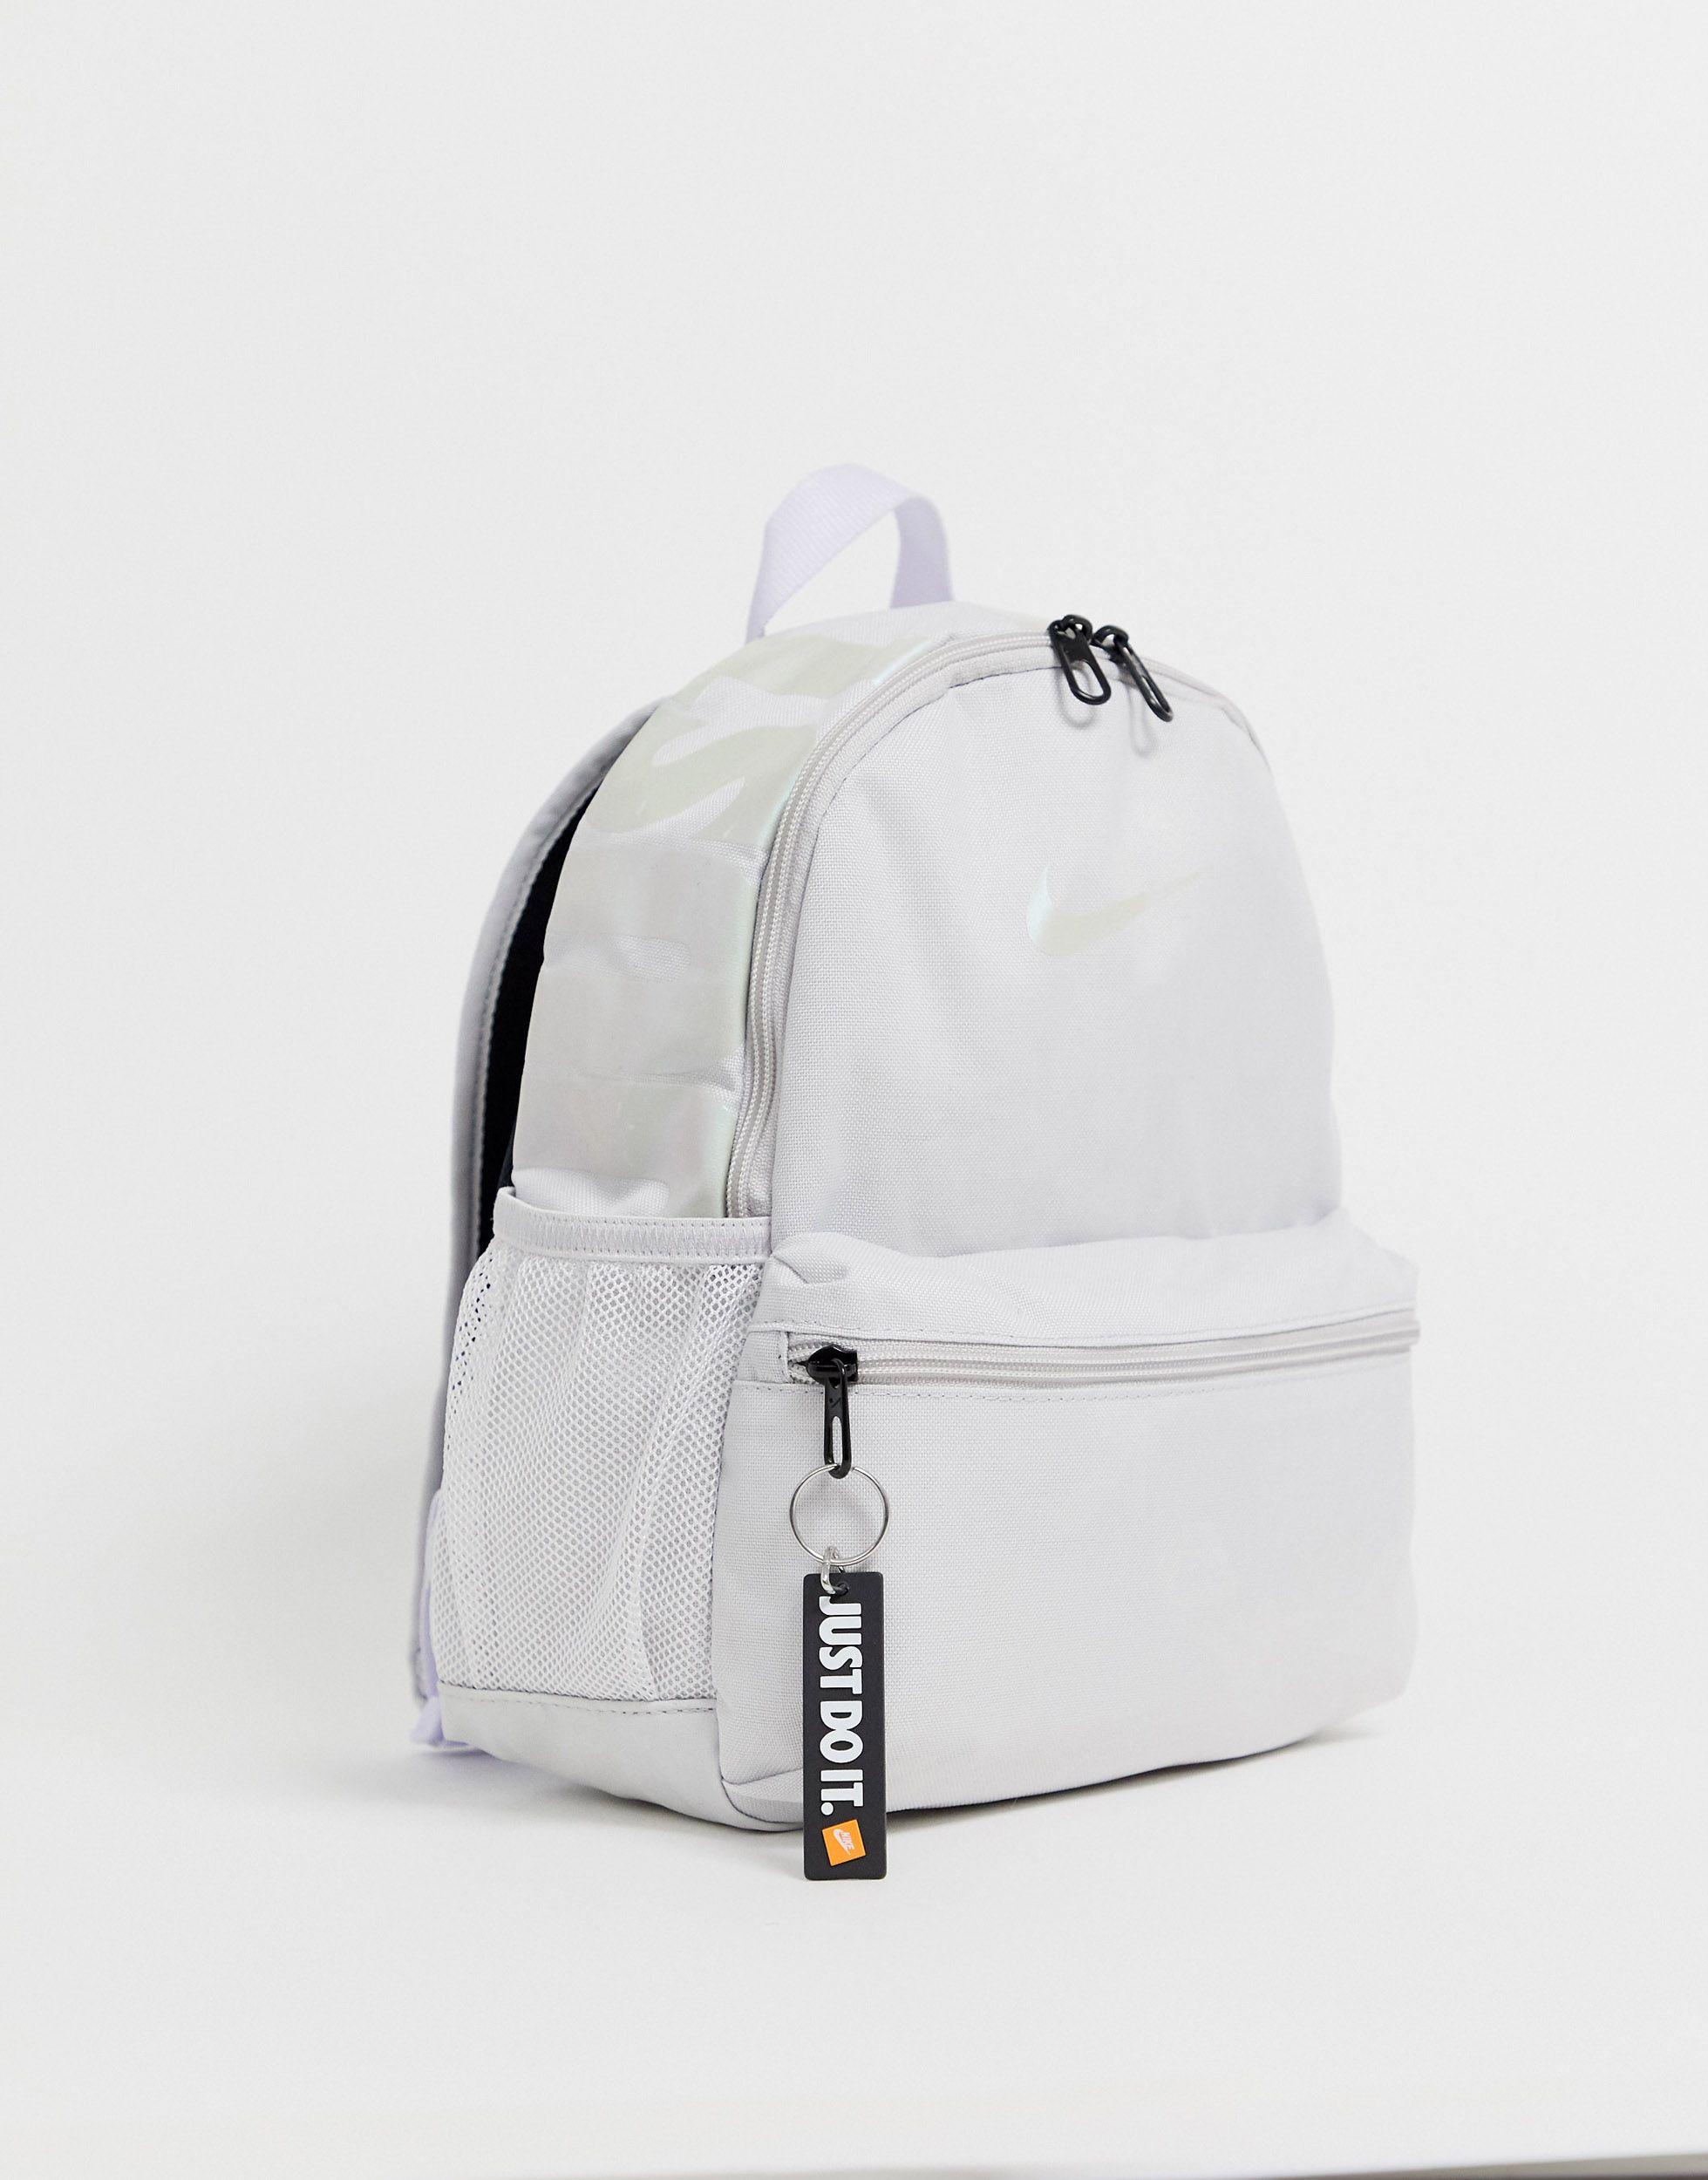 Nike Canvas Gray And Iridescent Just Do It Mini Backpack | Lyst Australia